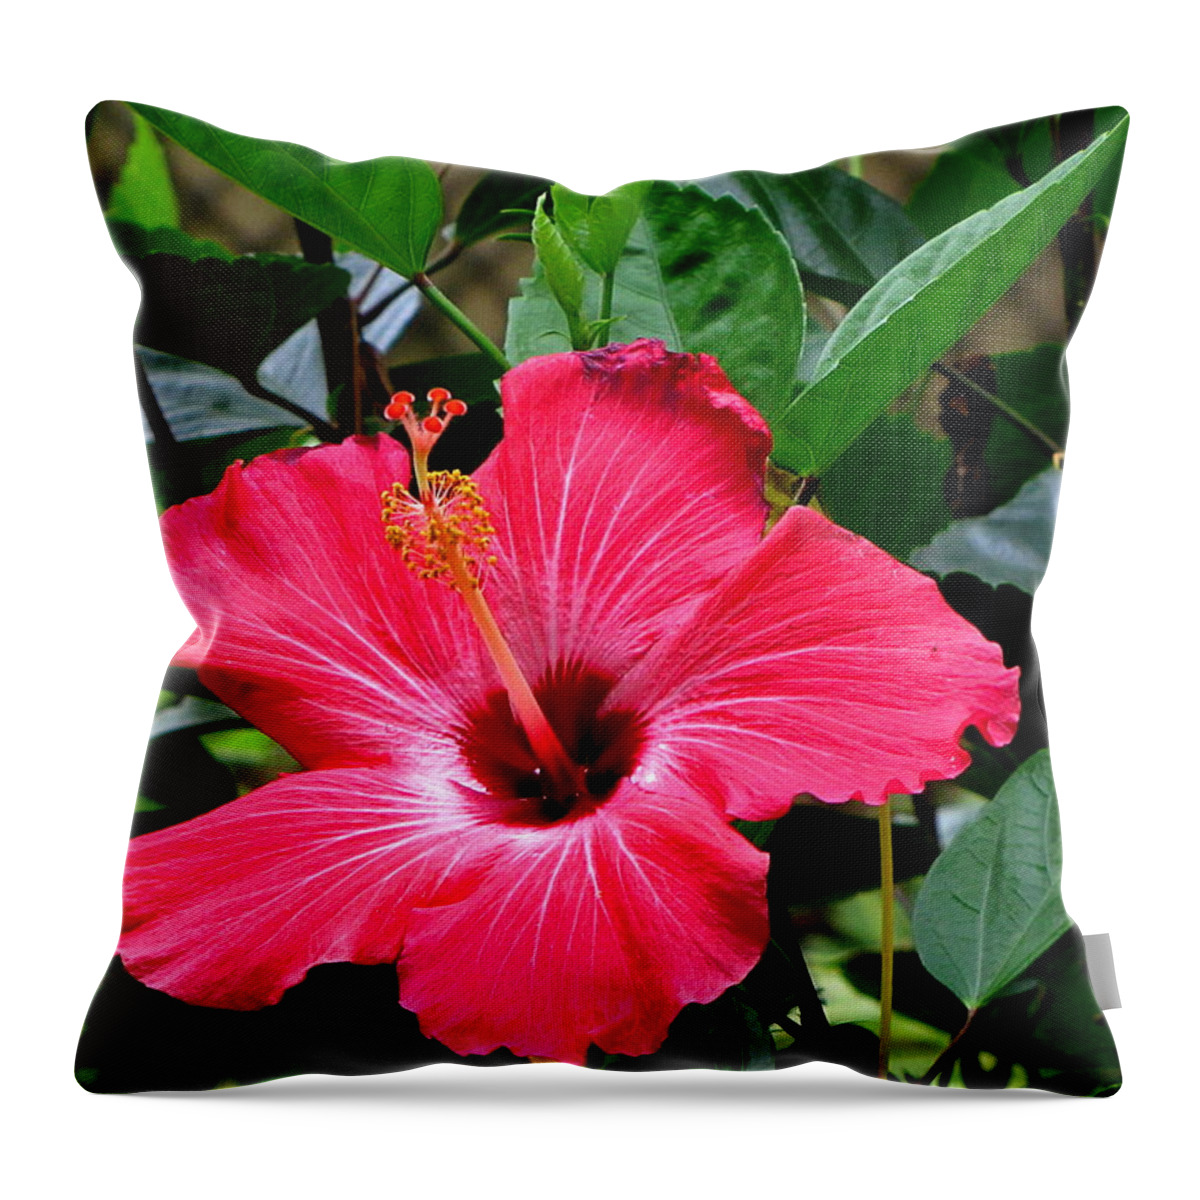 Hibiscus Throw Pillow featuring the photograph Red Hibiscus by Christopher Mercer